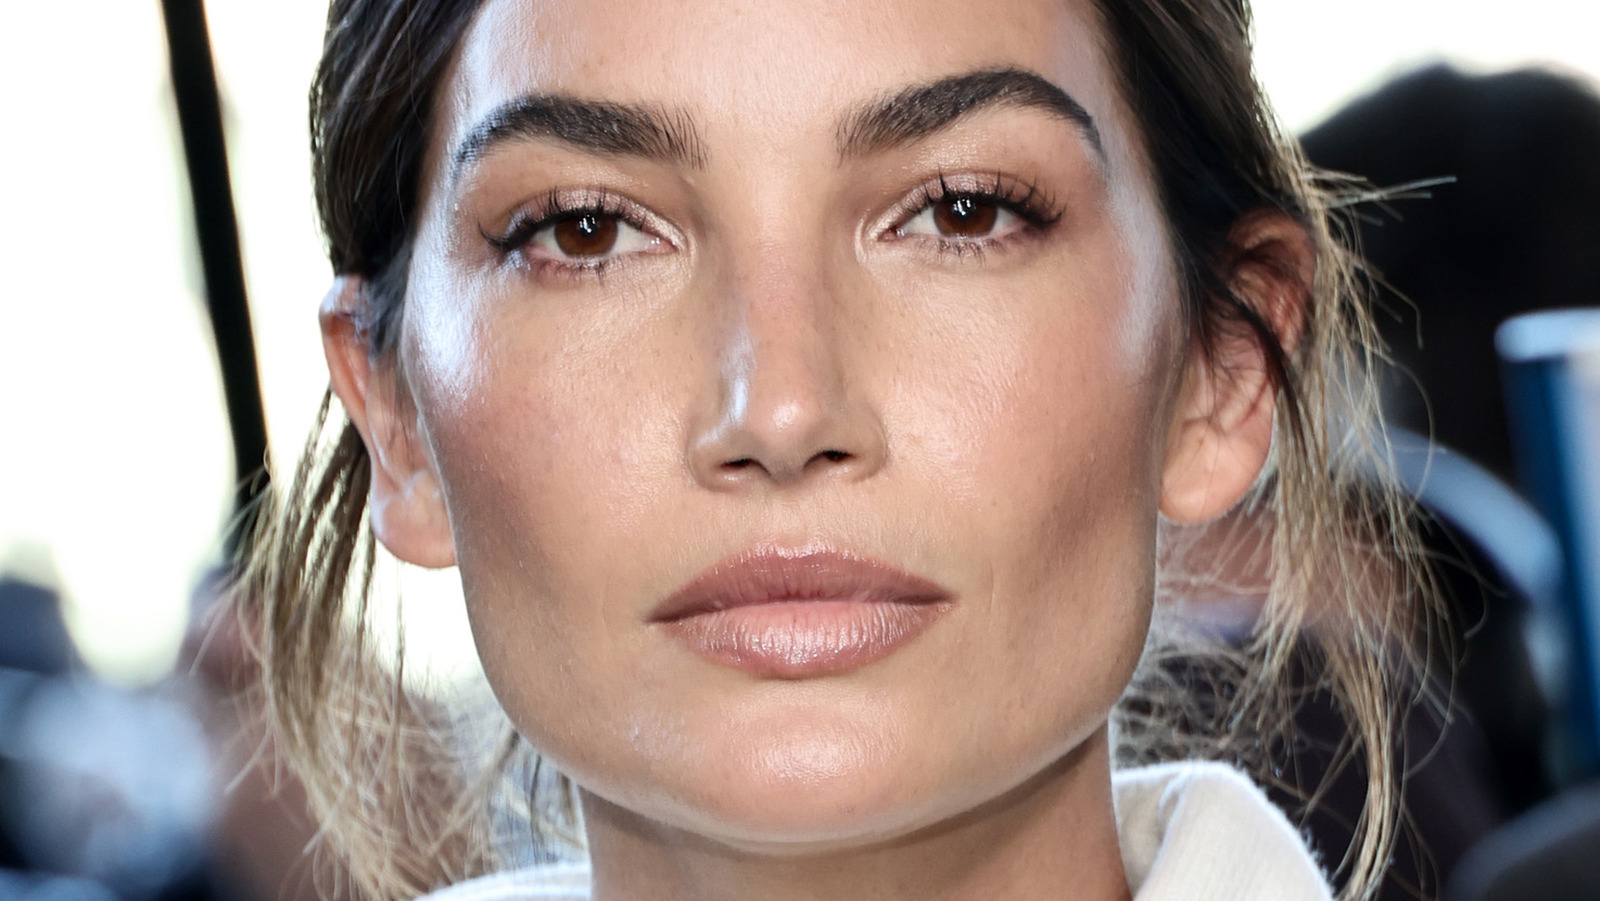 https://www.nickiswift.com/img/gallery/lily-aldridge-didnt-always-want-to-model-so-how-did-she-get-discovered/l-intro-1678639885.jpg